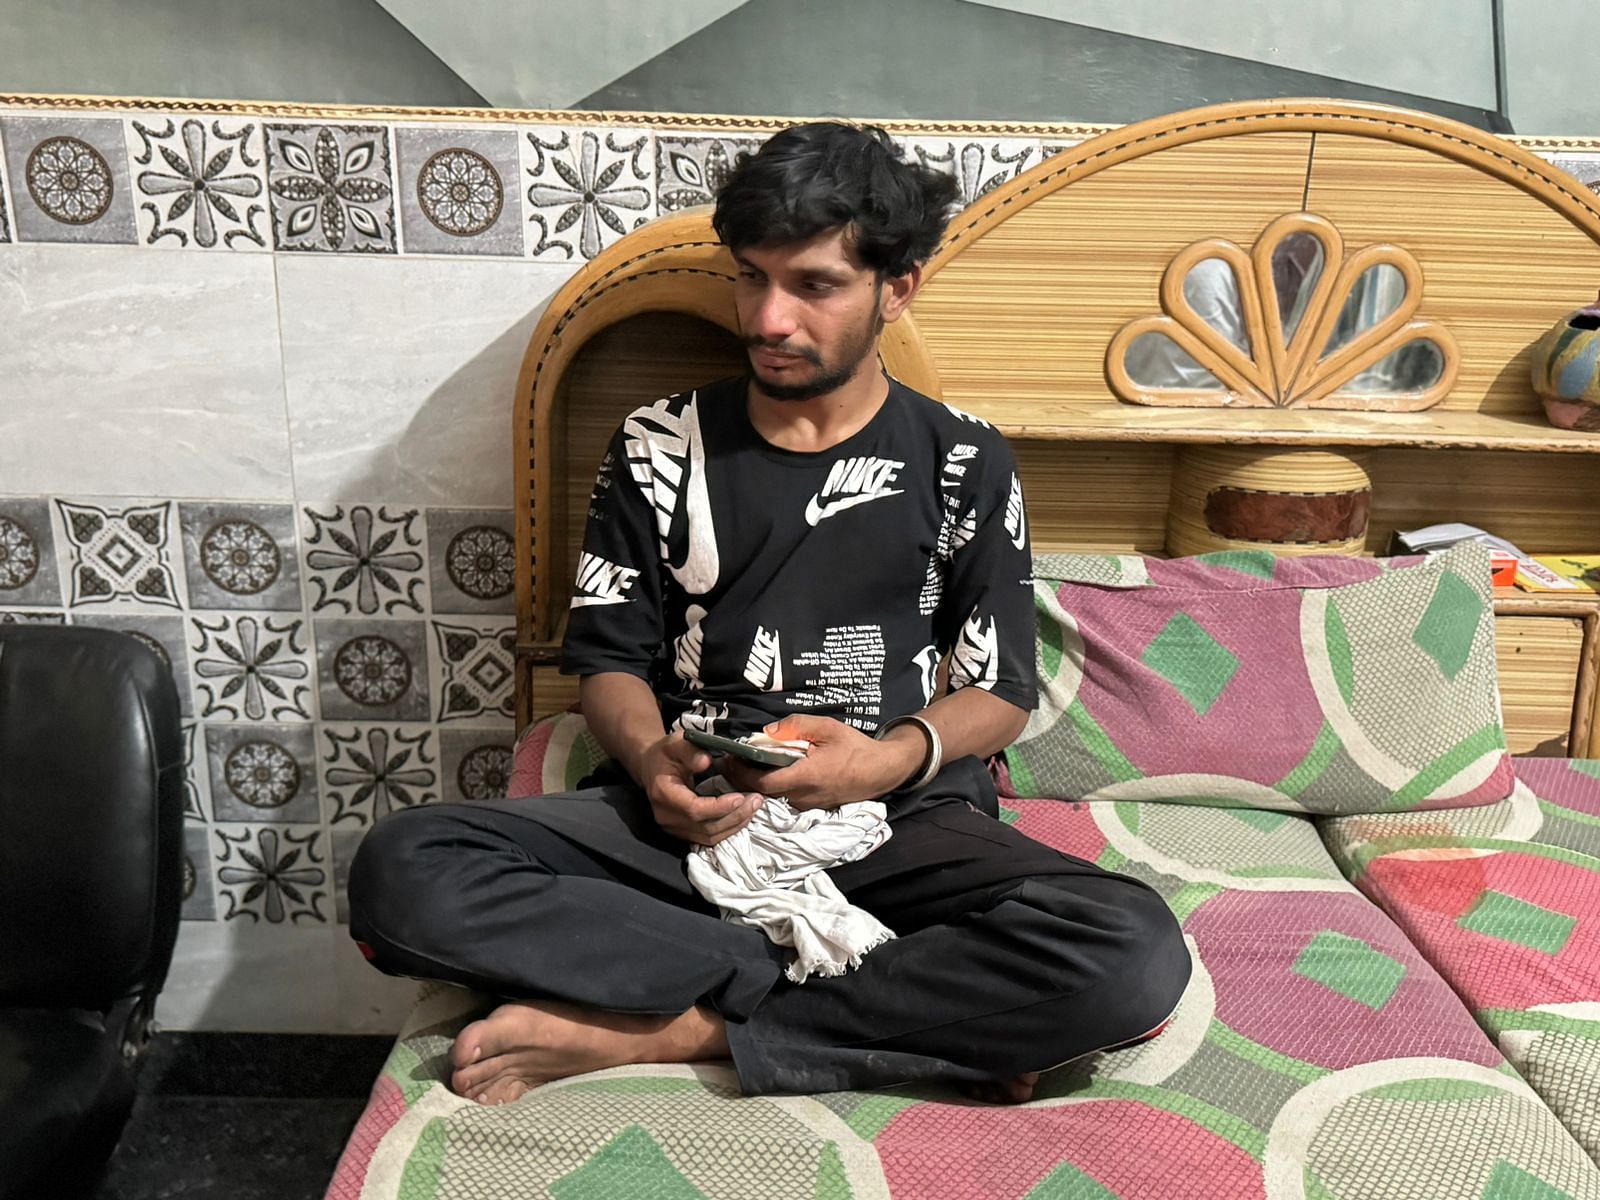 Anil Rajput (24) sits on the corner of the bed where his wife Komal was sitting moments before she was killed.